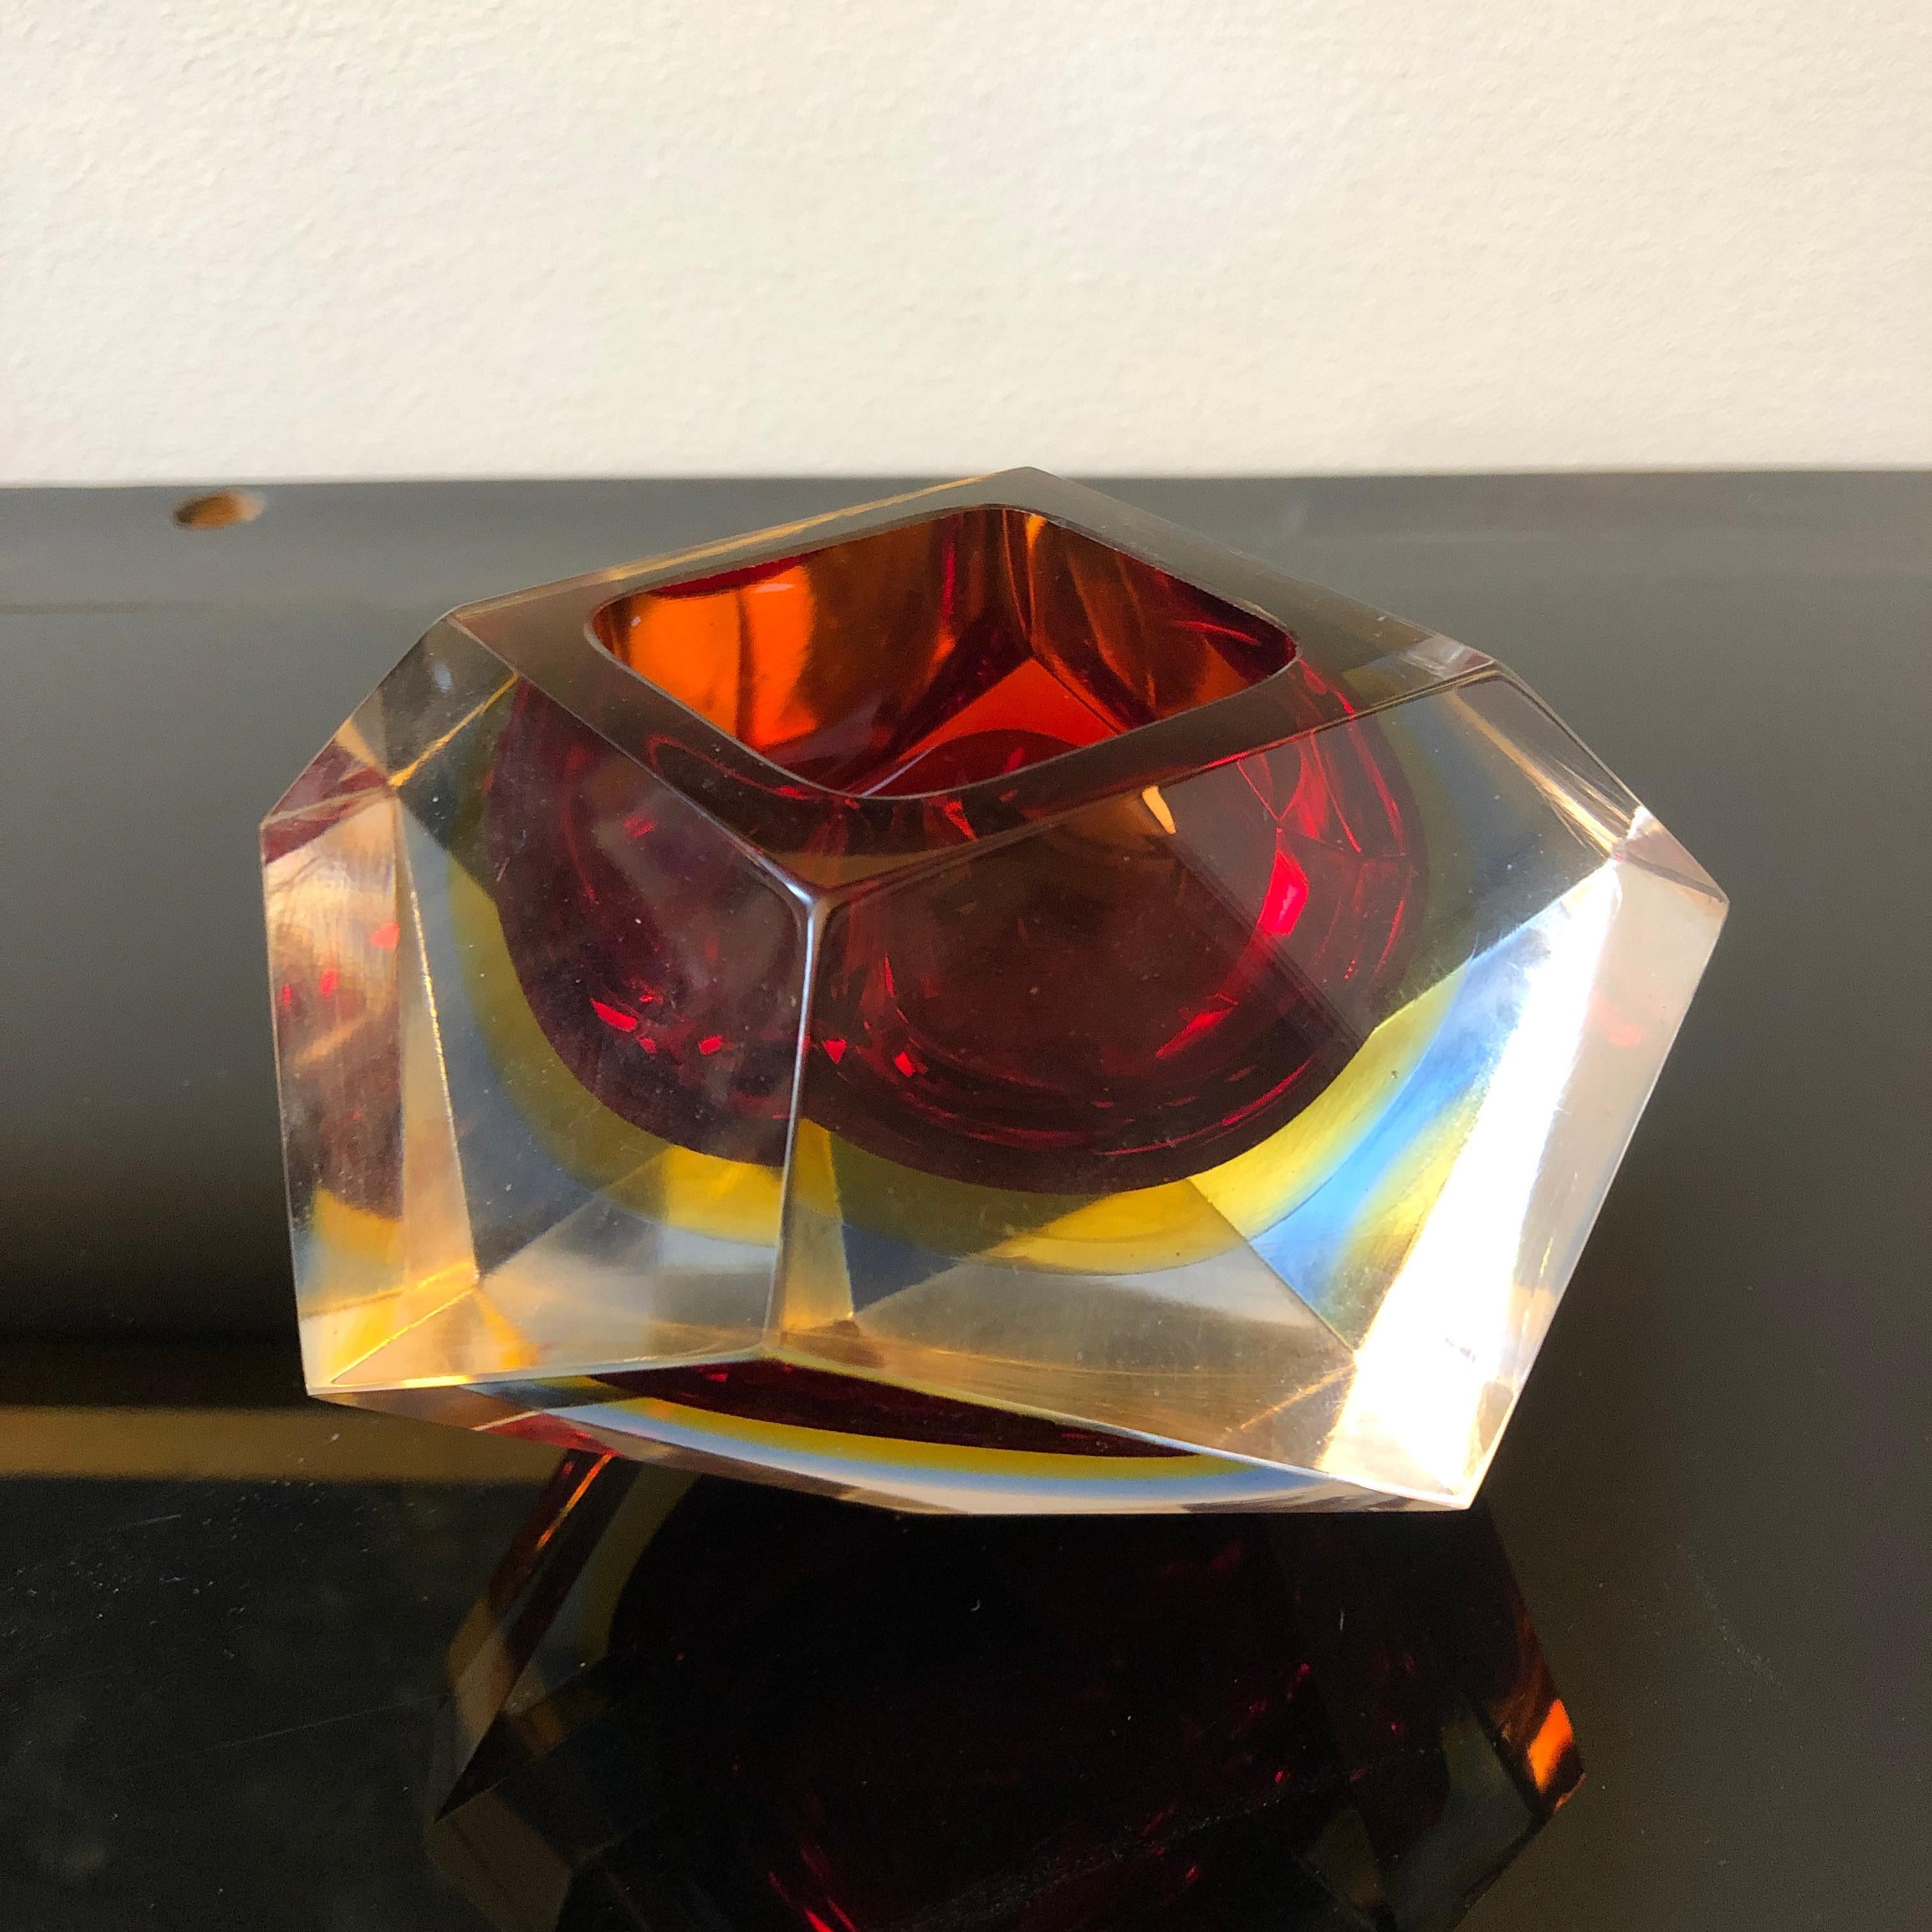 It's an iconic ashtray by Seguso, made in Italy in the 1970, red and yellow Murano glass.